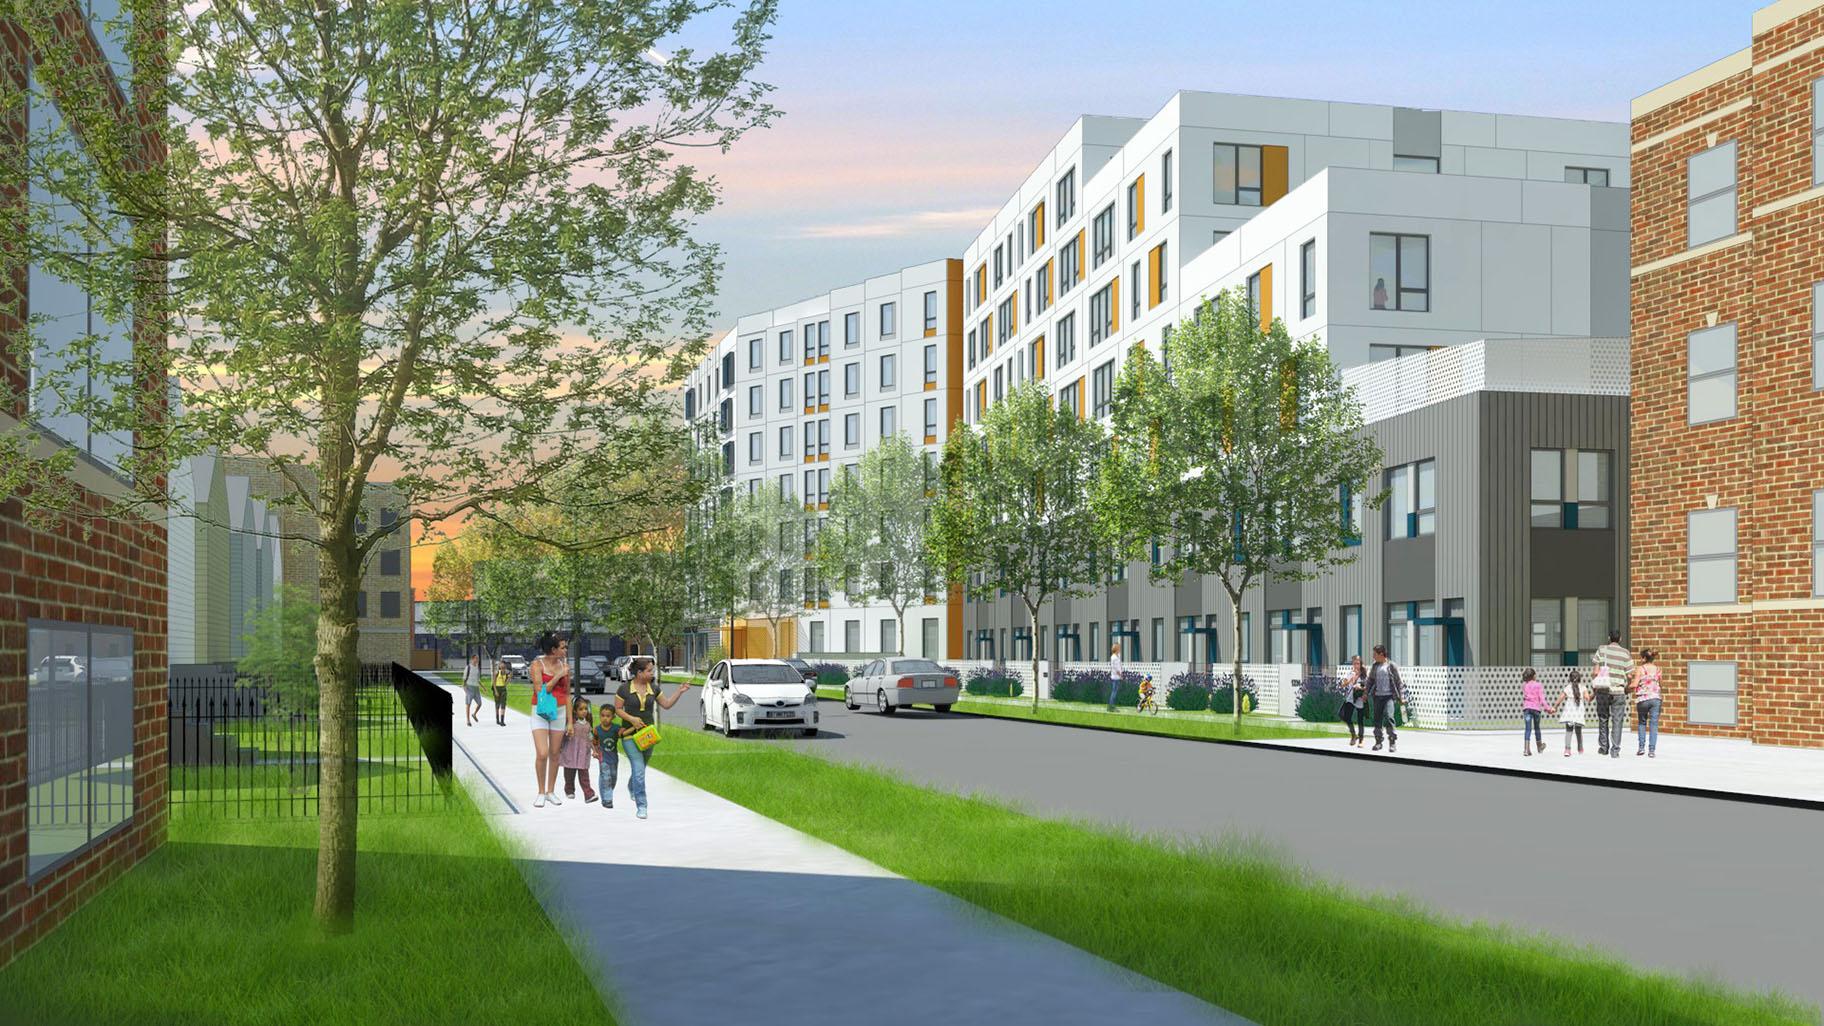 A rendering of the Emmett Street Project slated for Chicago’s Logan Square neighborhood. (Bickerdike Redevelopment Corporation)